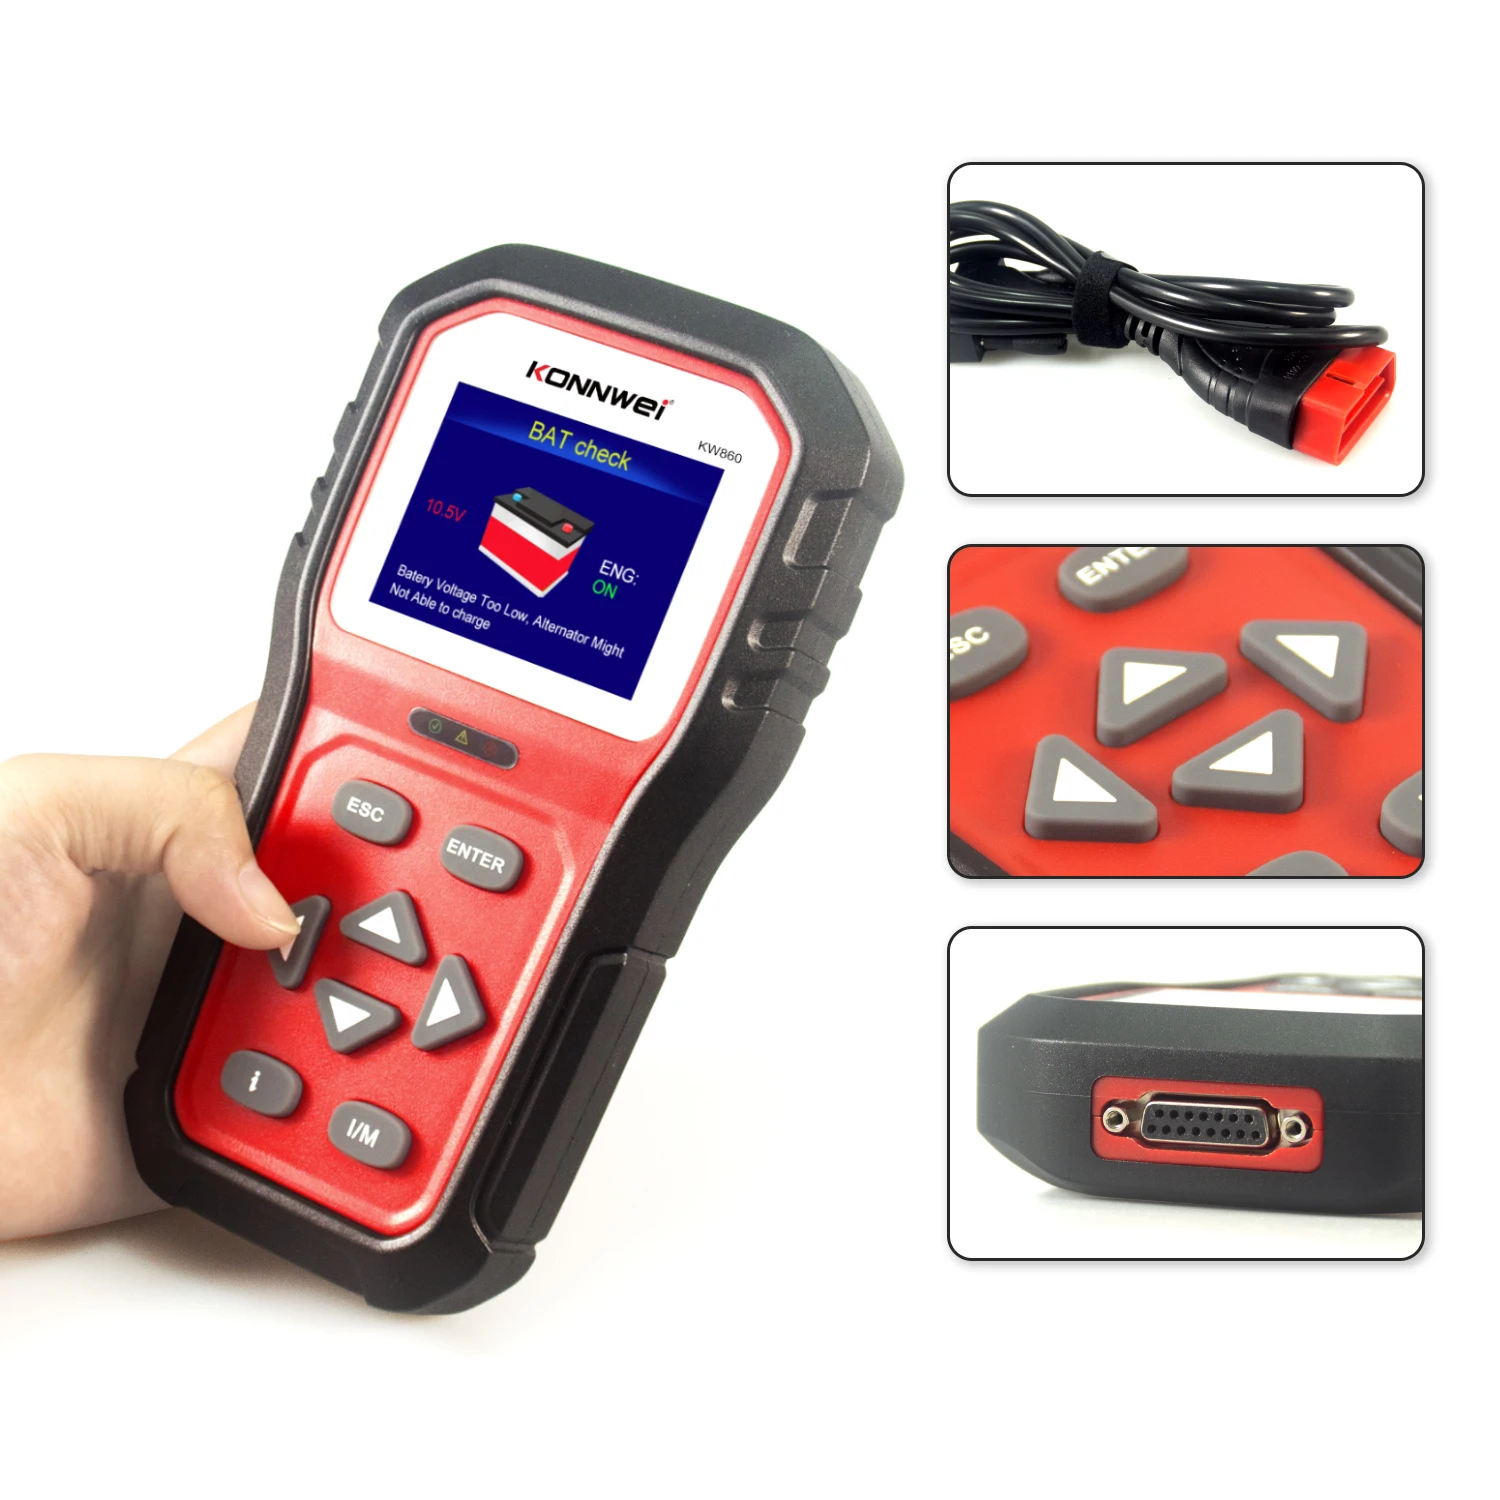 TFT Color Display and Built-in Speaker Diagnostic Scan Tool Enhanced Vehicles Car Fault Code Reader Featuring the Unique One-Click I/M Readiness Key Discoball KW680 OBDII/EOBD Code Reader Scanner 